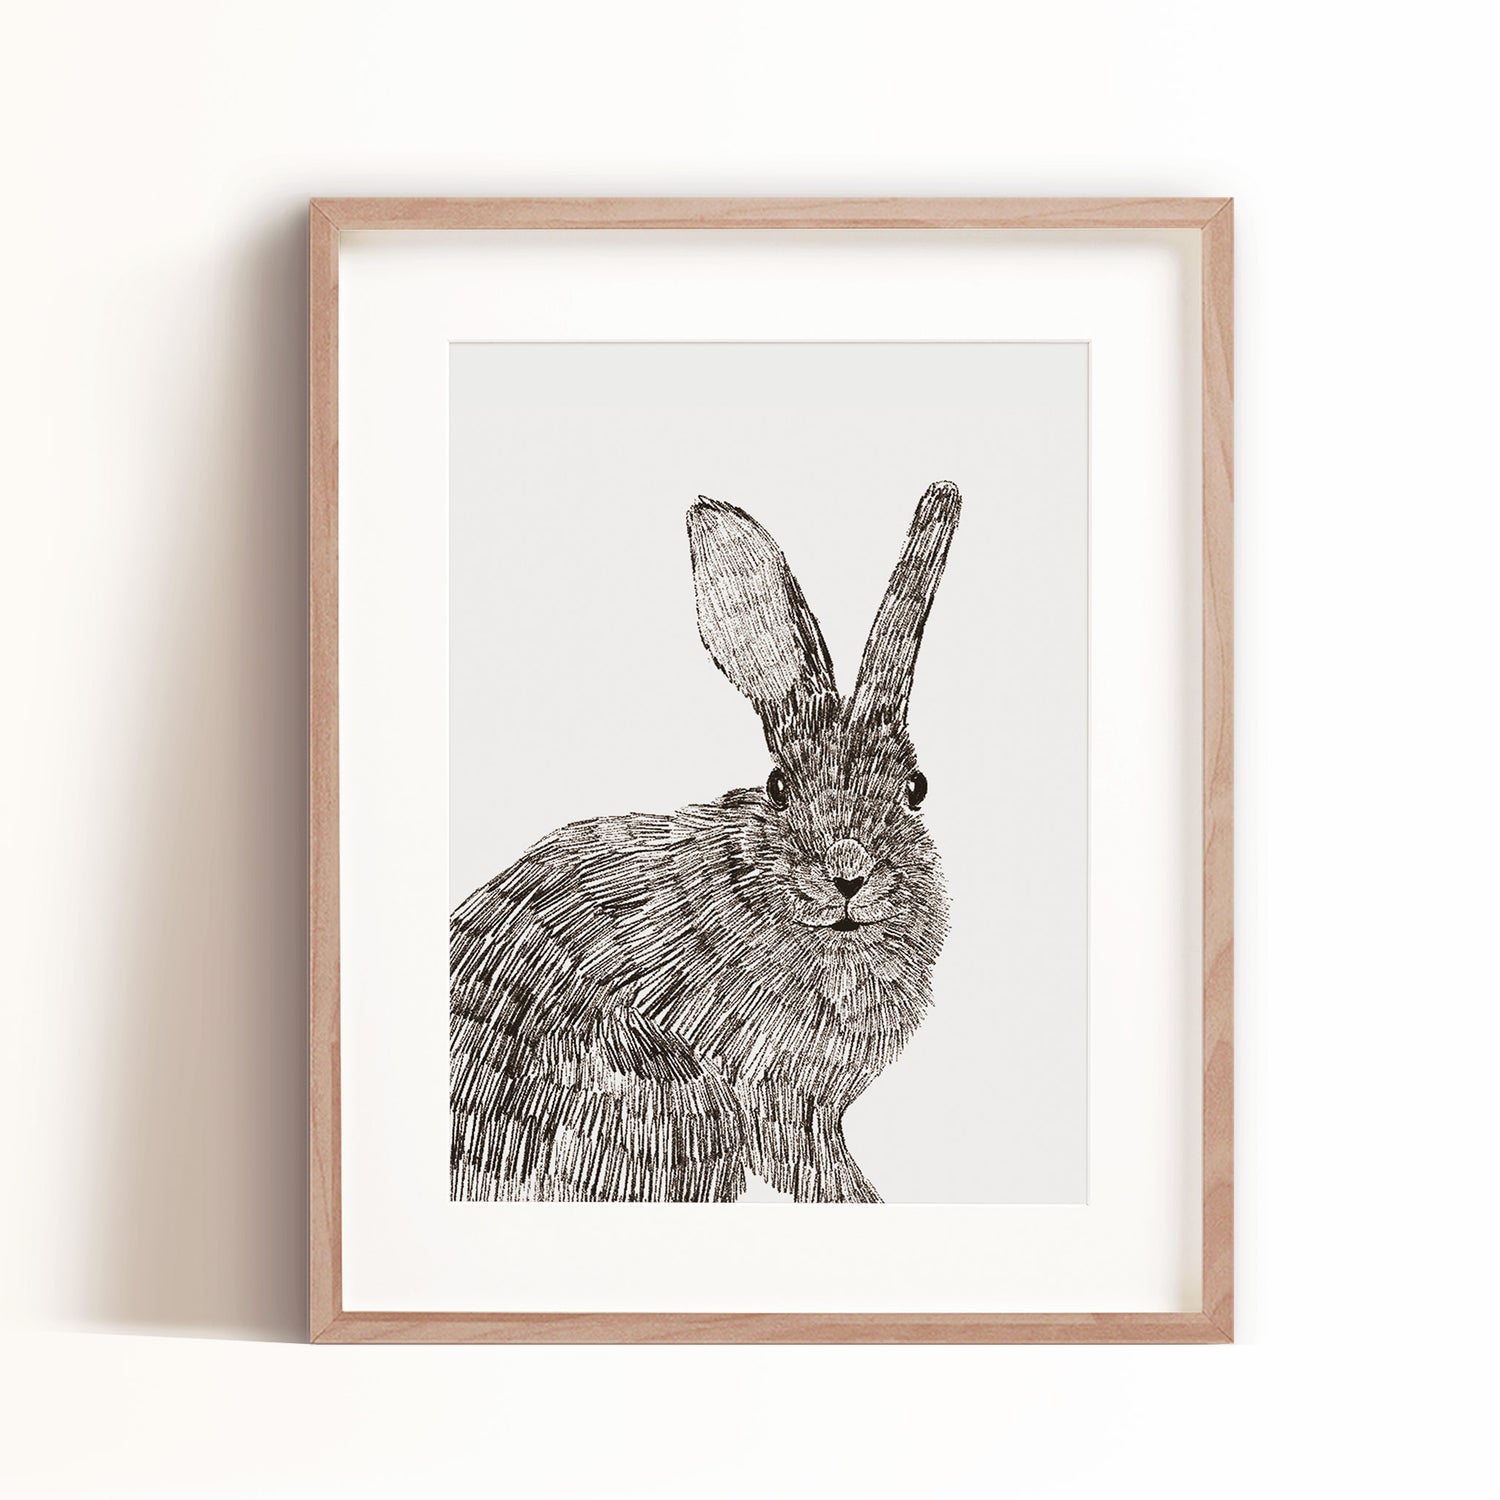 Our Bunny art print's black and white color scheme is the perfect complement to any nursery or kids room.